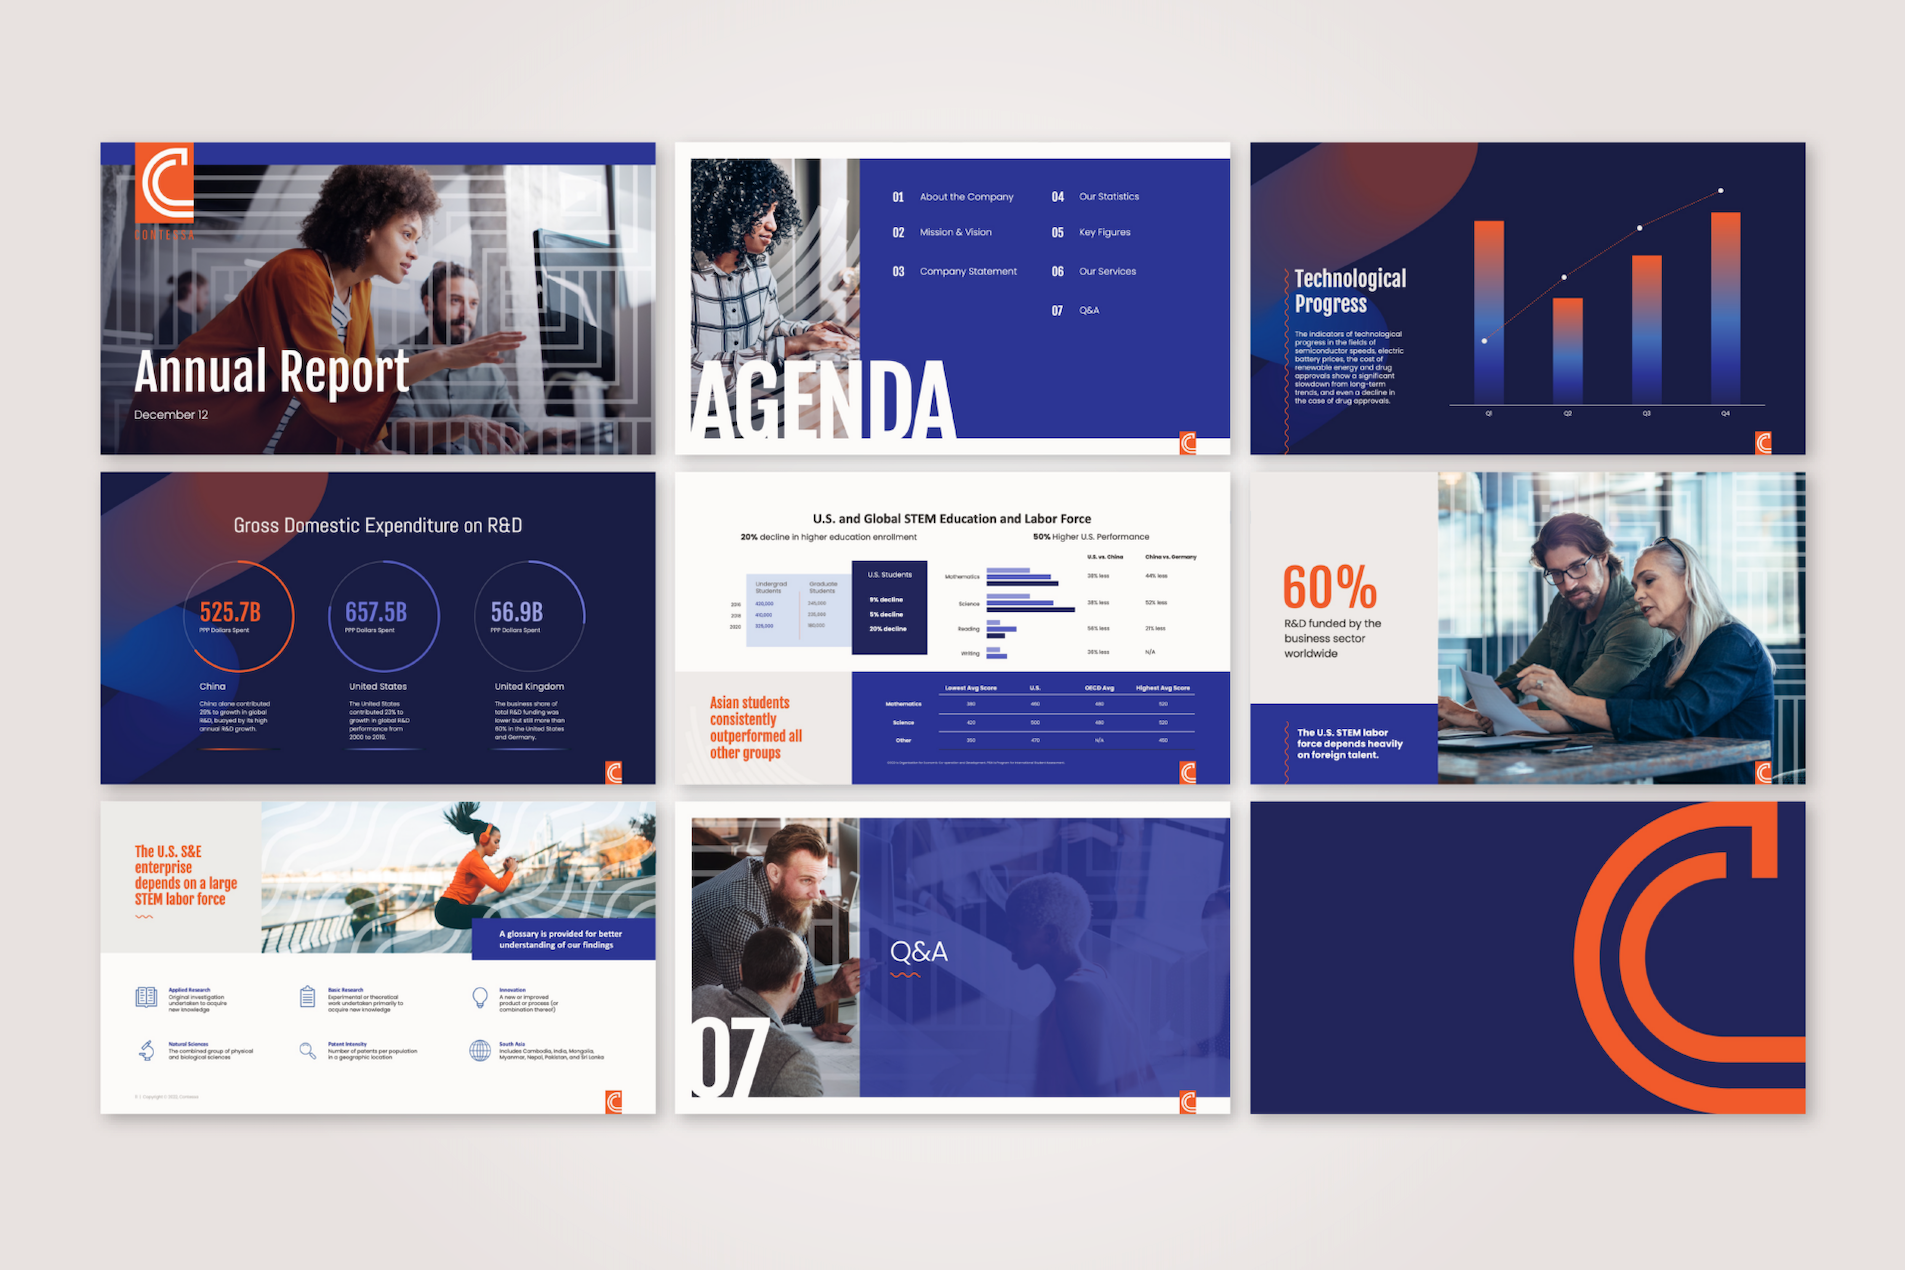 Examples of presentation design: colorful slides with engaging visuals, clear text, and professional layout.